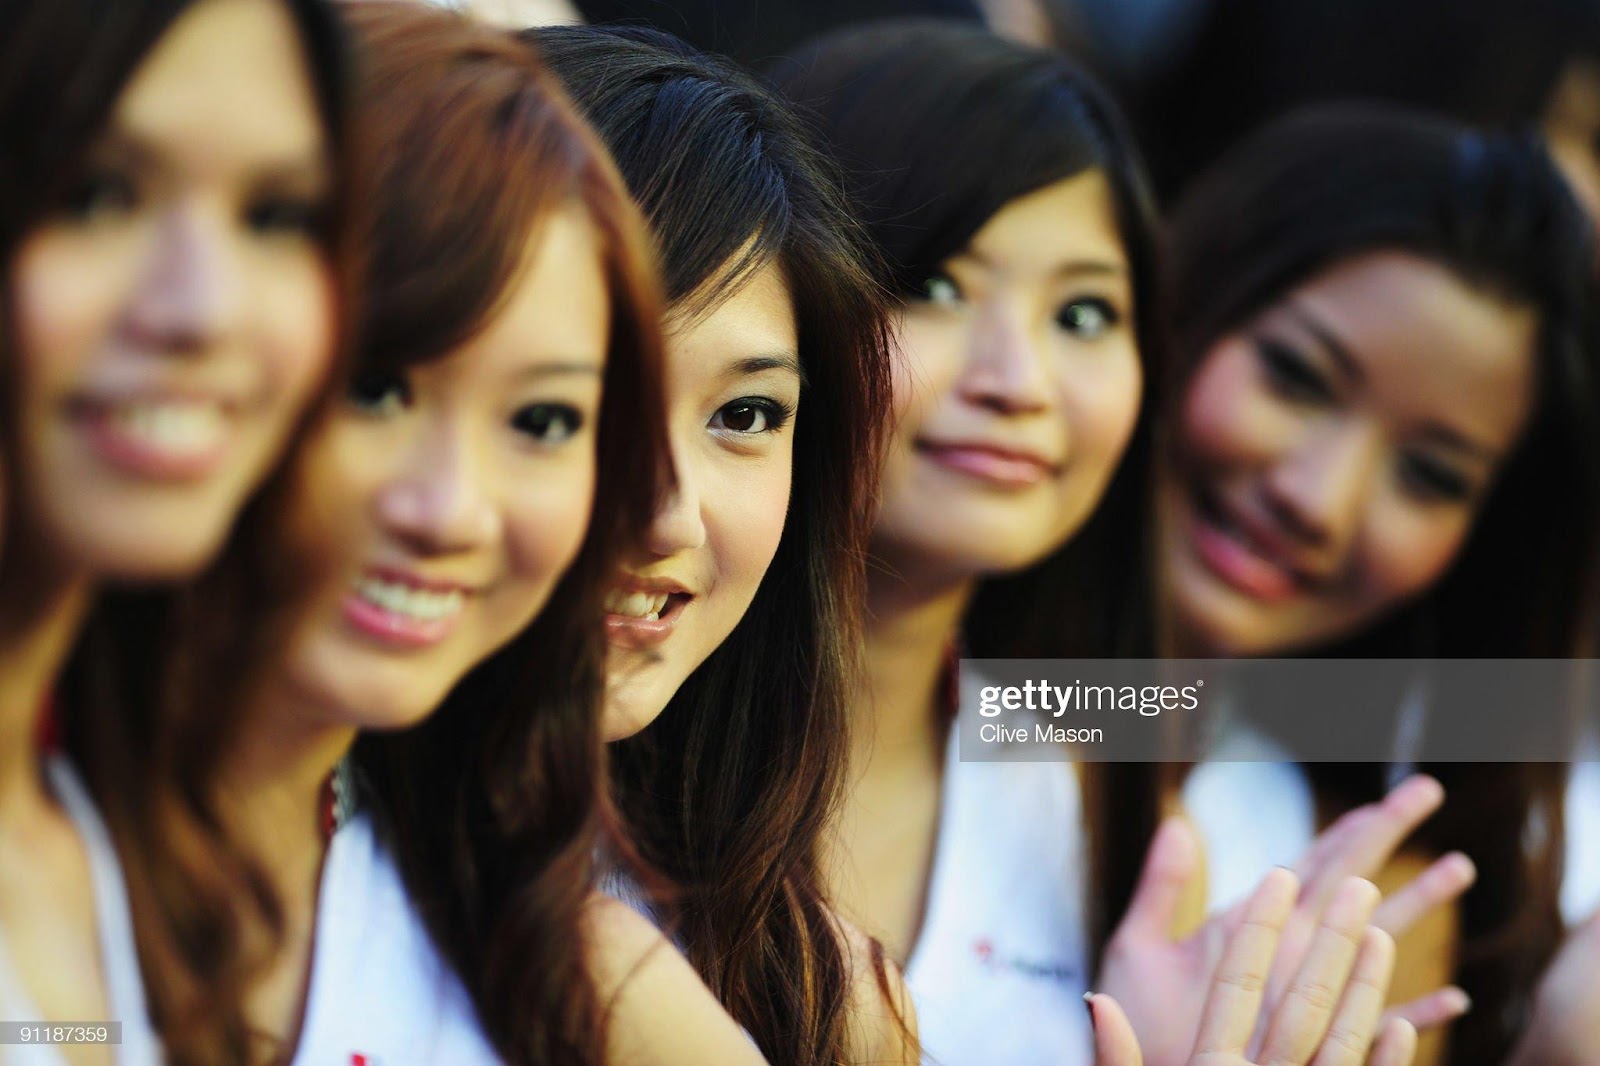 D:\Documenti\posts\posts\Women and motorsport\foto\Getty e altre\Singapore\grid-girls-are-seen-before-the-singapore-formula-one-grand-prix-at-picture-id91187359.jpg